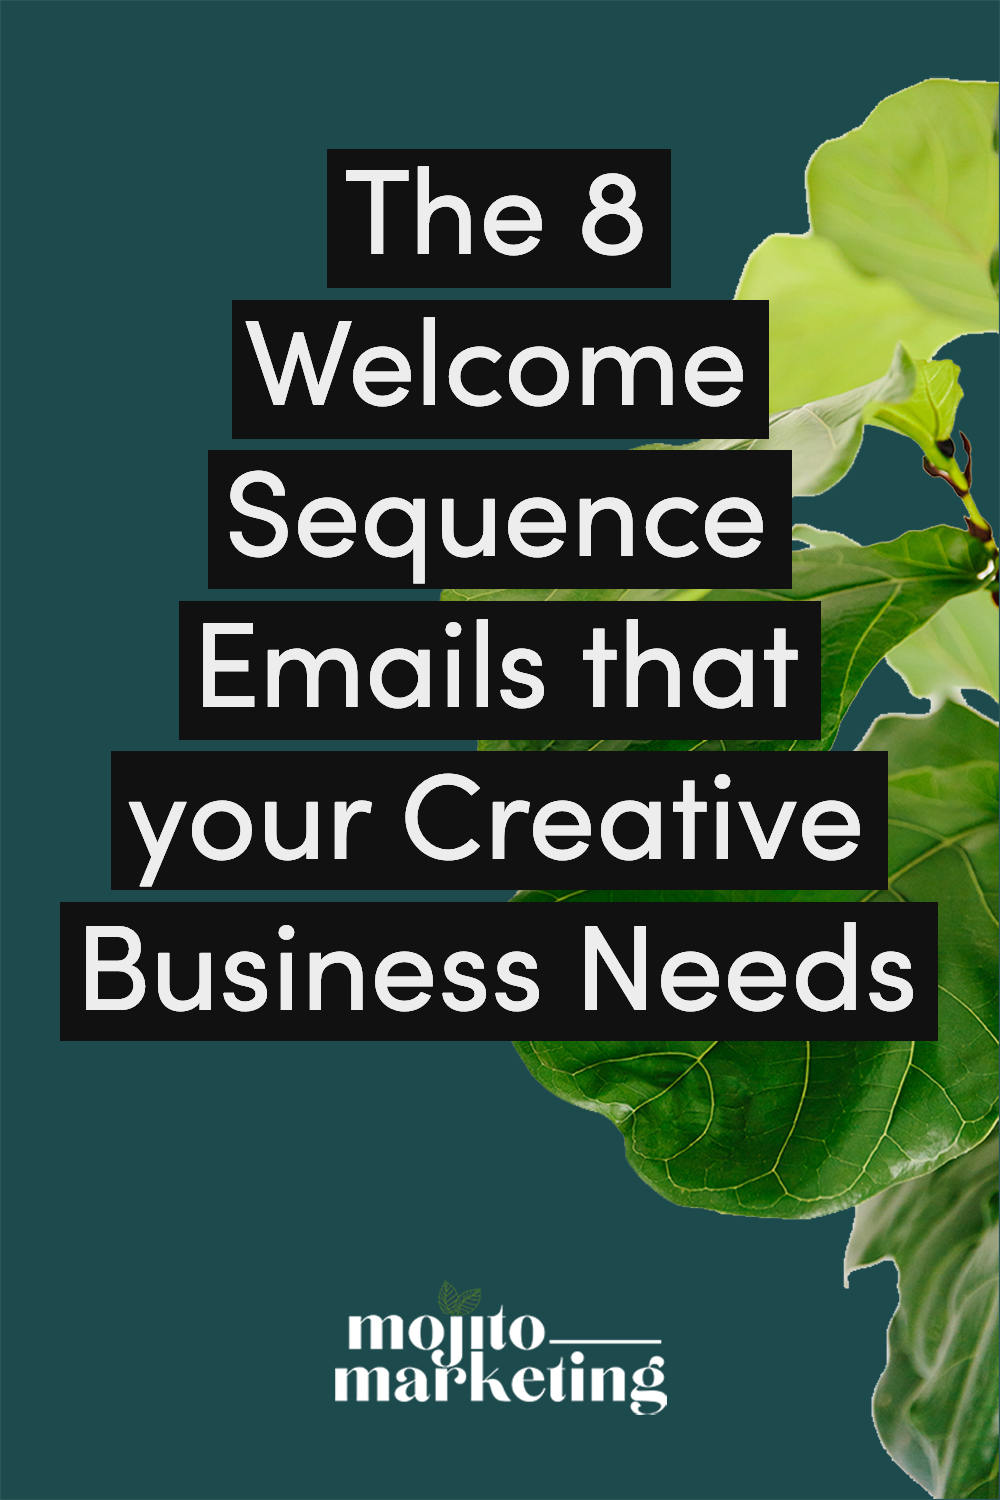 The_8_Welcome_Sequence_Emails_that_your_Creative_Business_Needs.png